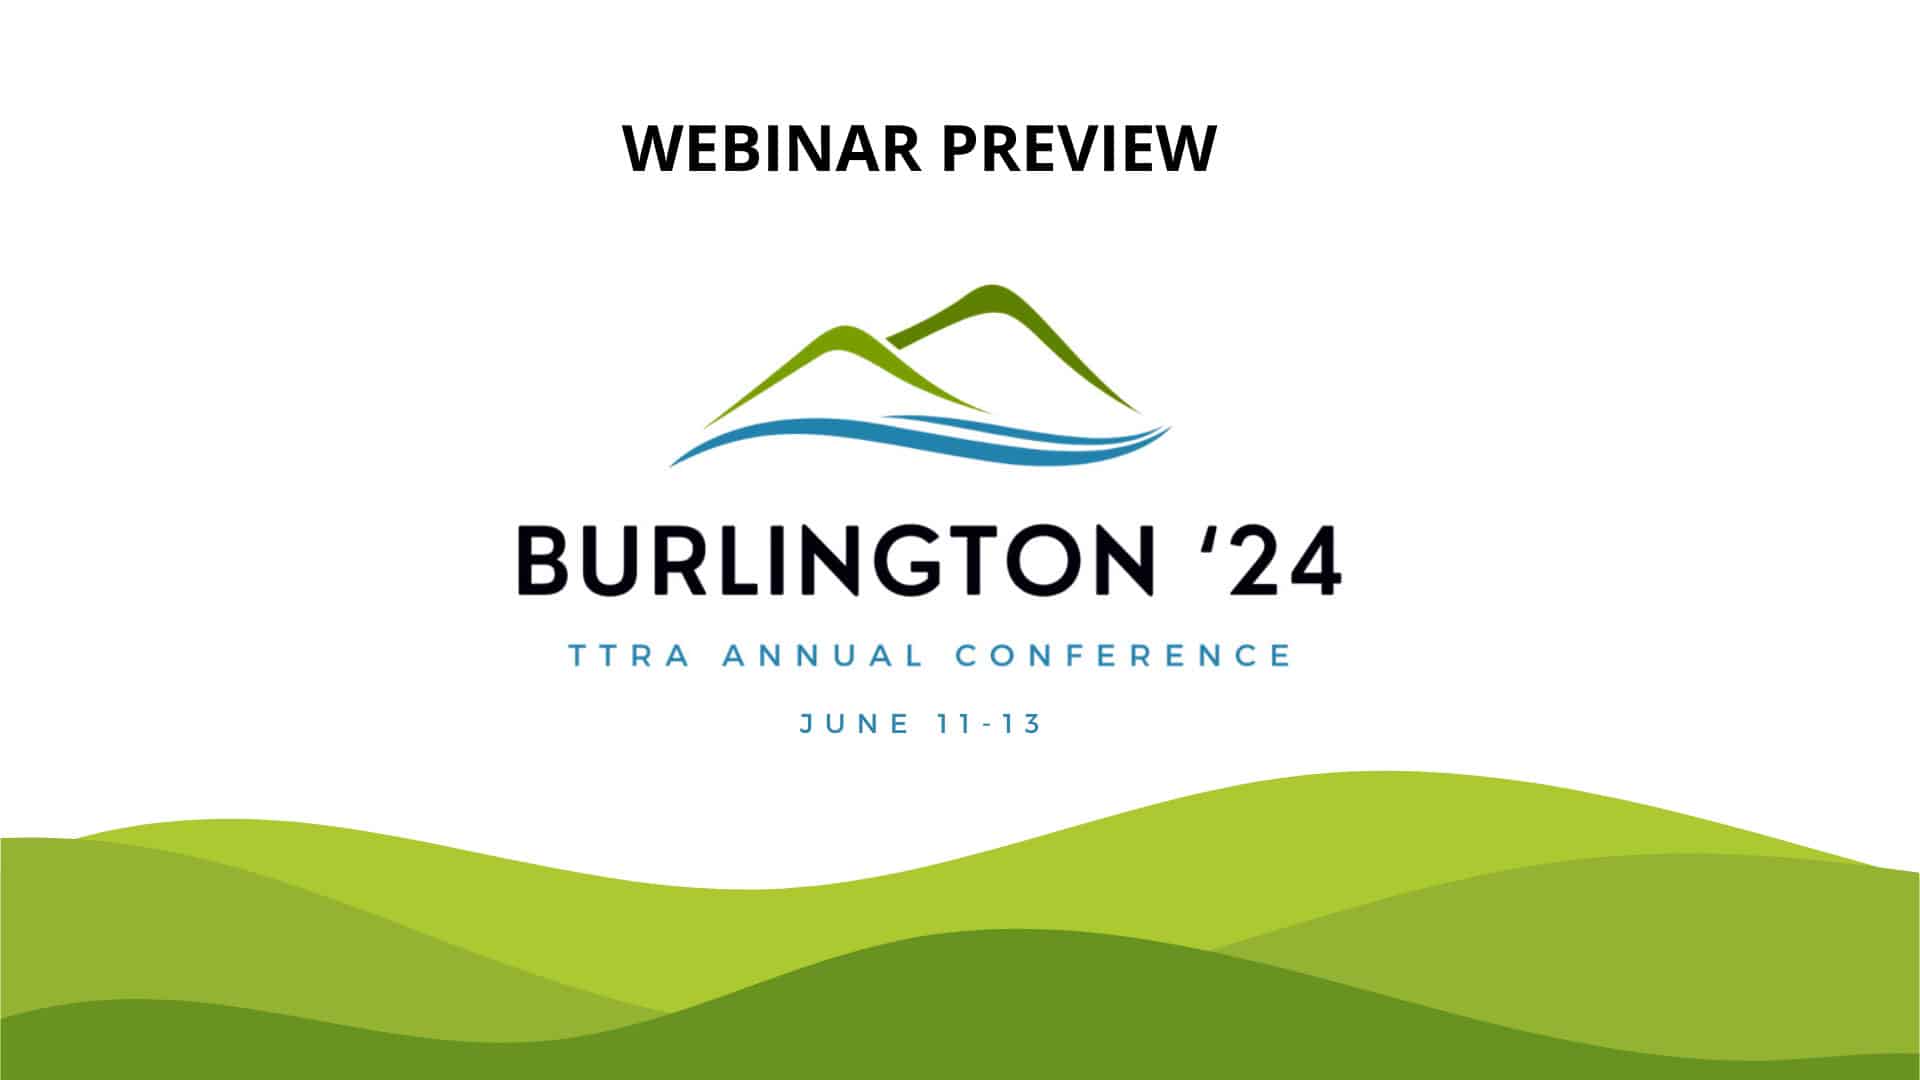 TTRA Annual Conference Webinar Preview